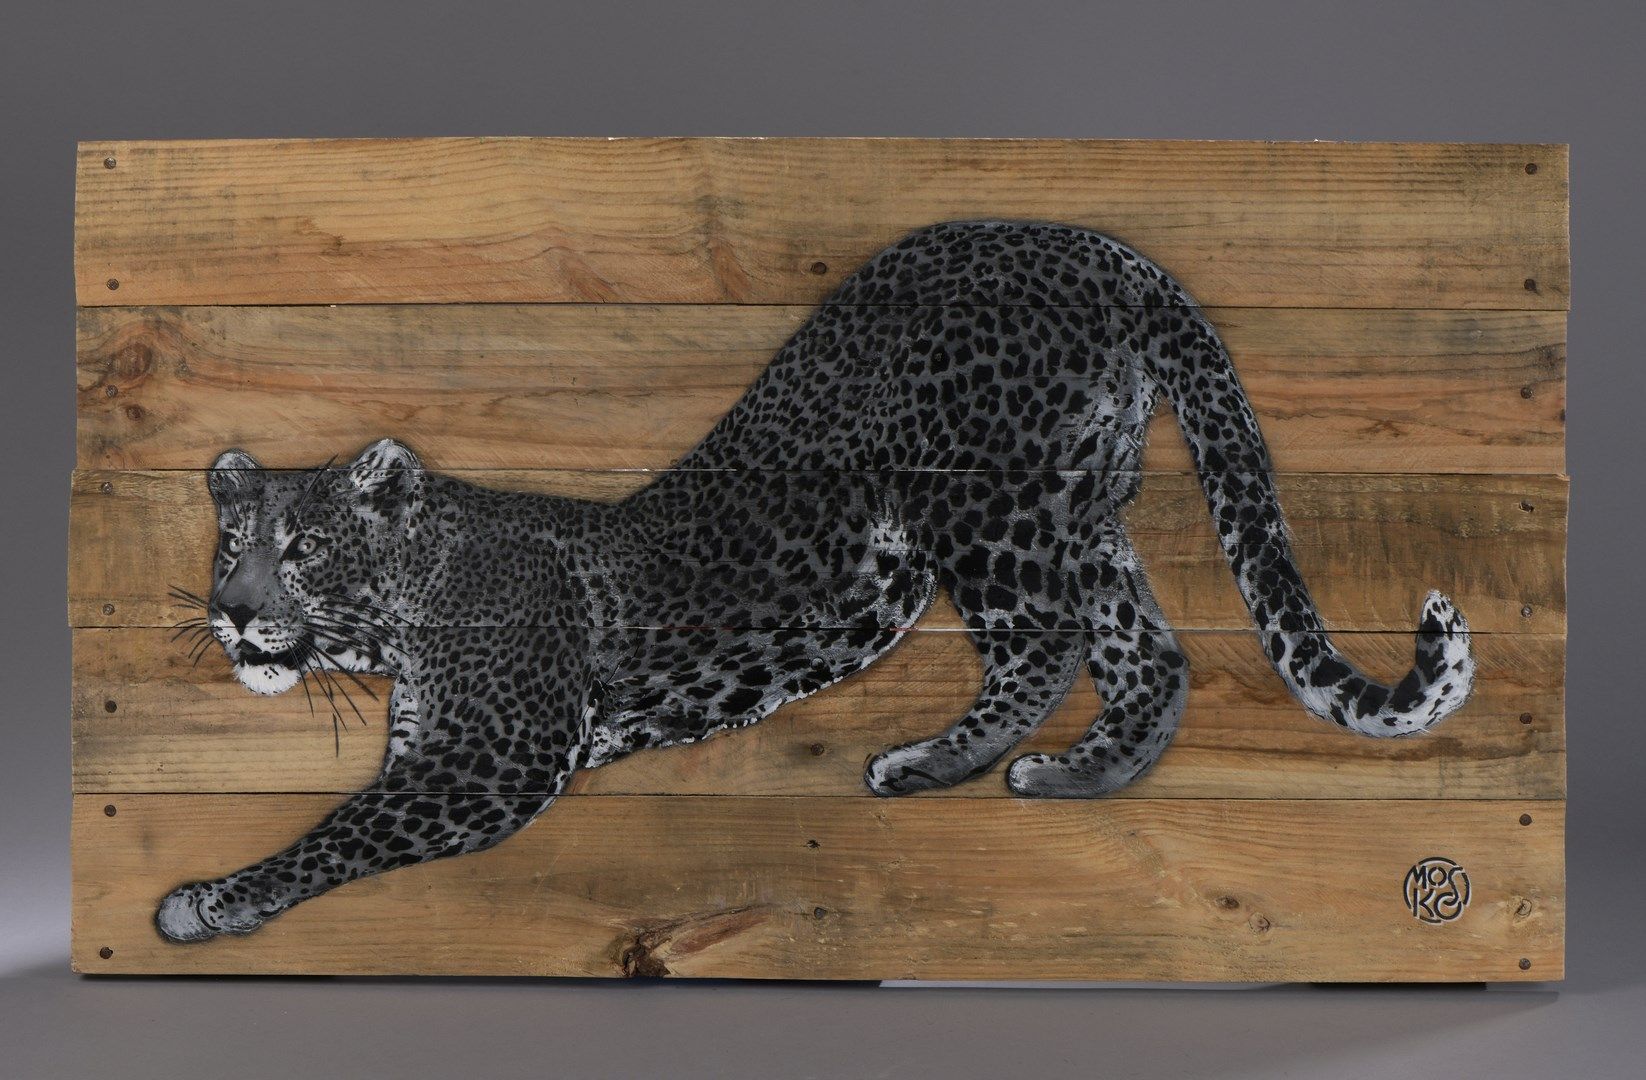 Null MOSKO (born in 1953)

Grey cambered panther 

Mixed media on wood 

Signed &hellip;